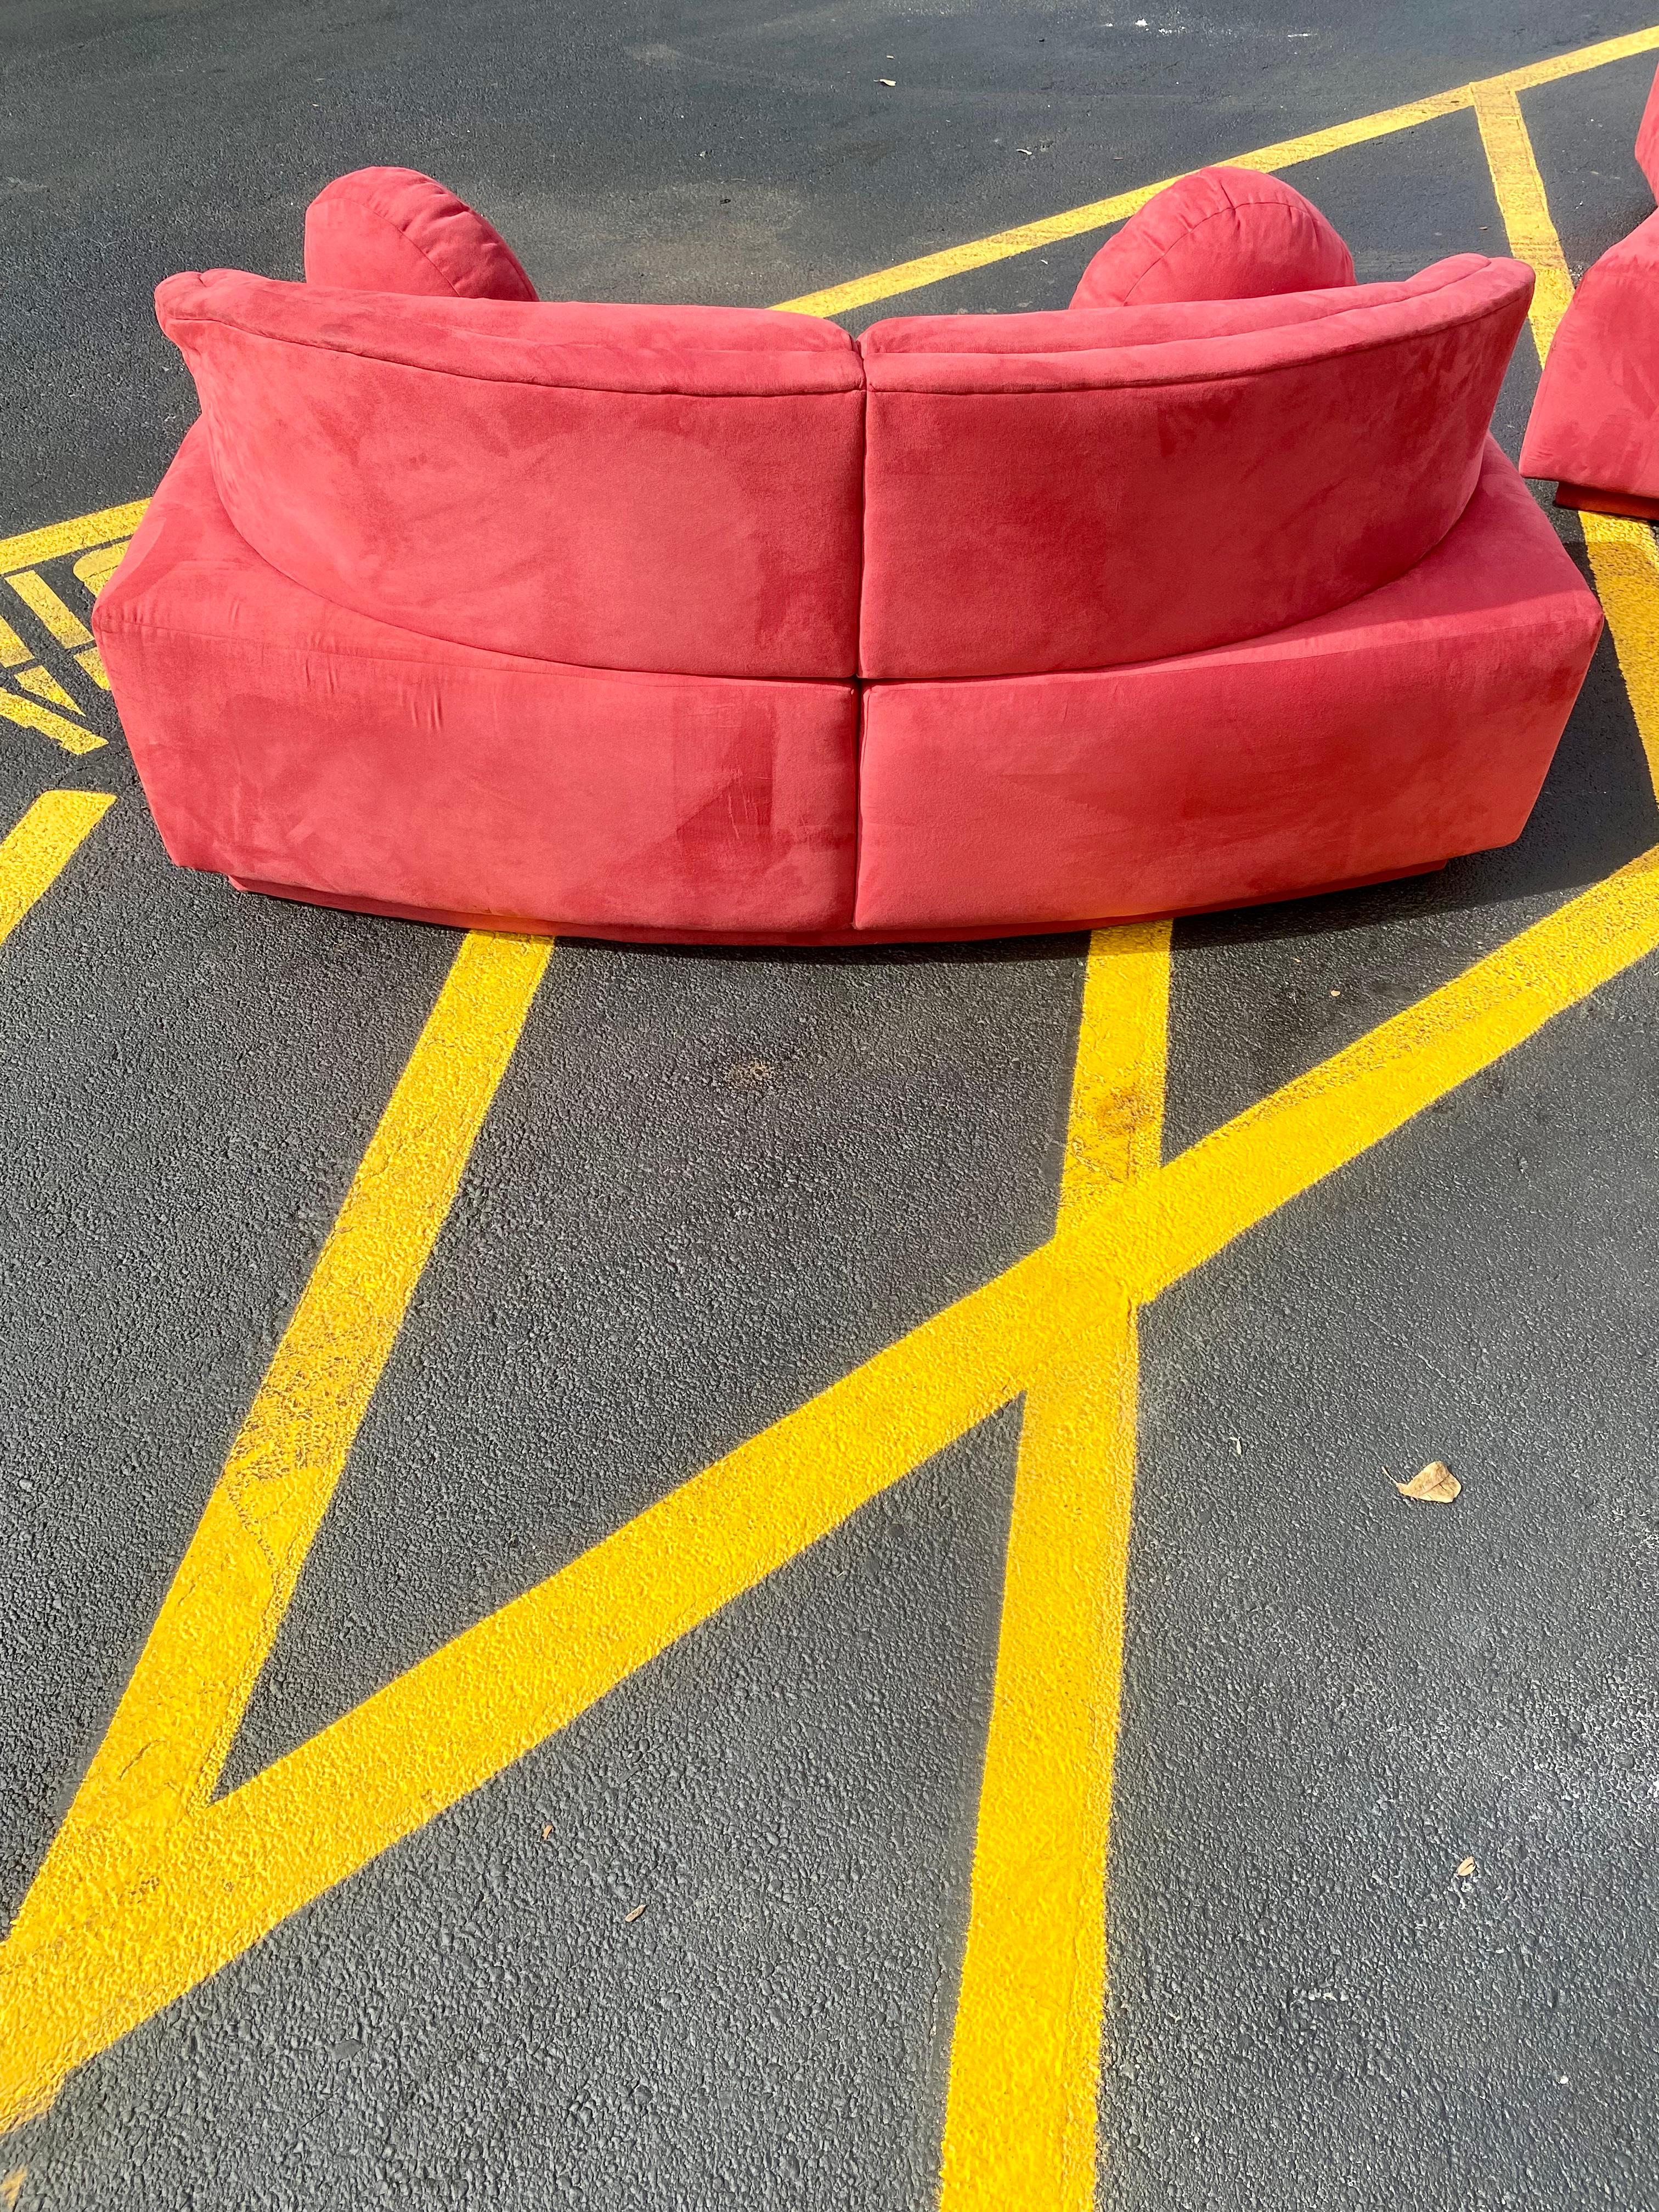 1980s Sculptural Weiman Red Cloud Sofa Loveseat, Set of 2 For Sale 5